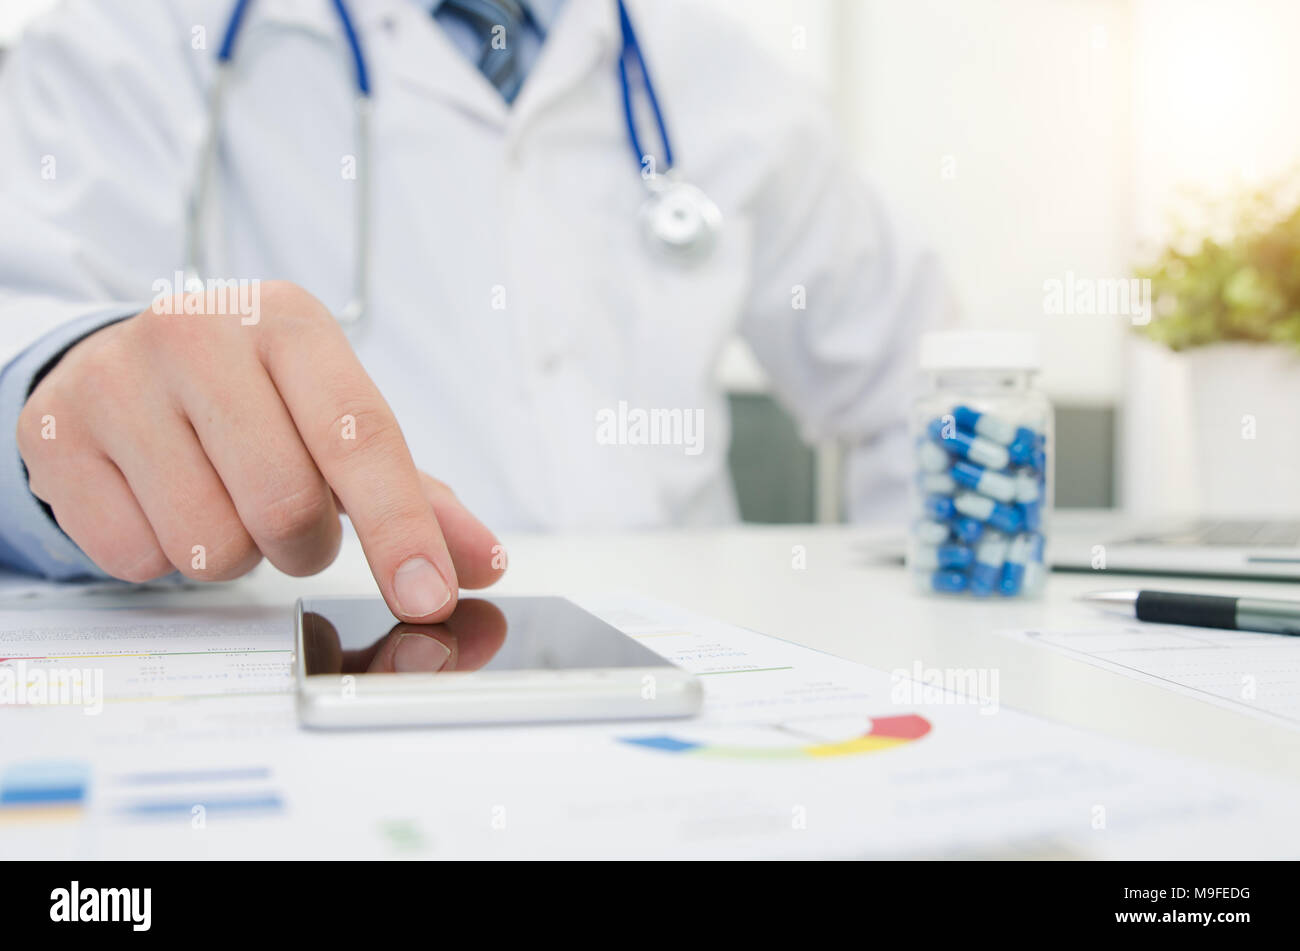 Doctor working with phone and laptop in hospital or clinic. Medical healthcare concept Stock Photo